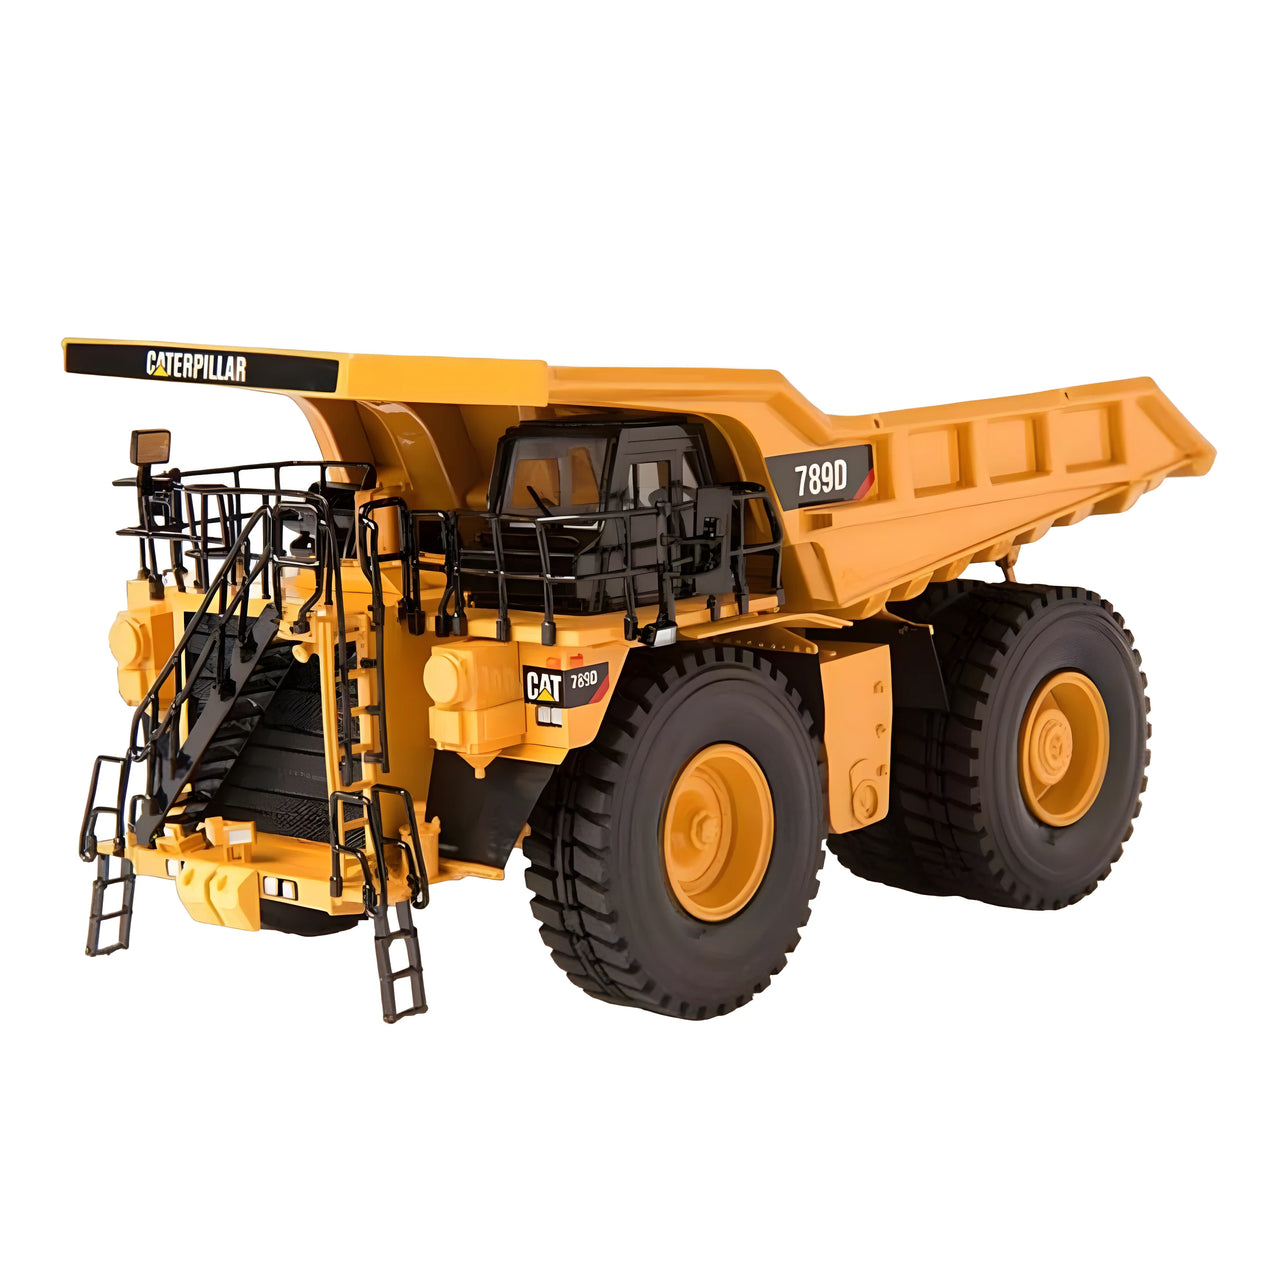 CCM789D-Y Caterpillar 789D Mining Truck 1:87 Scale (Discontinued Model)